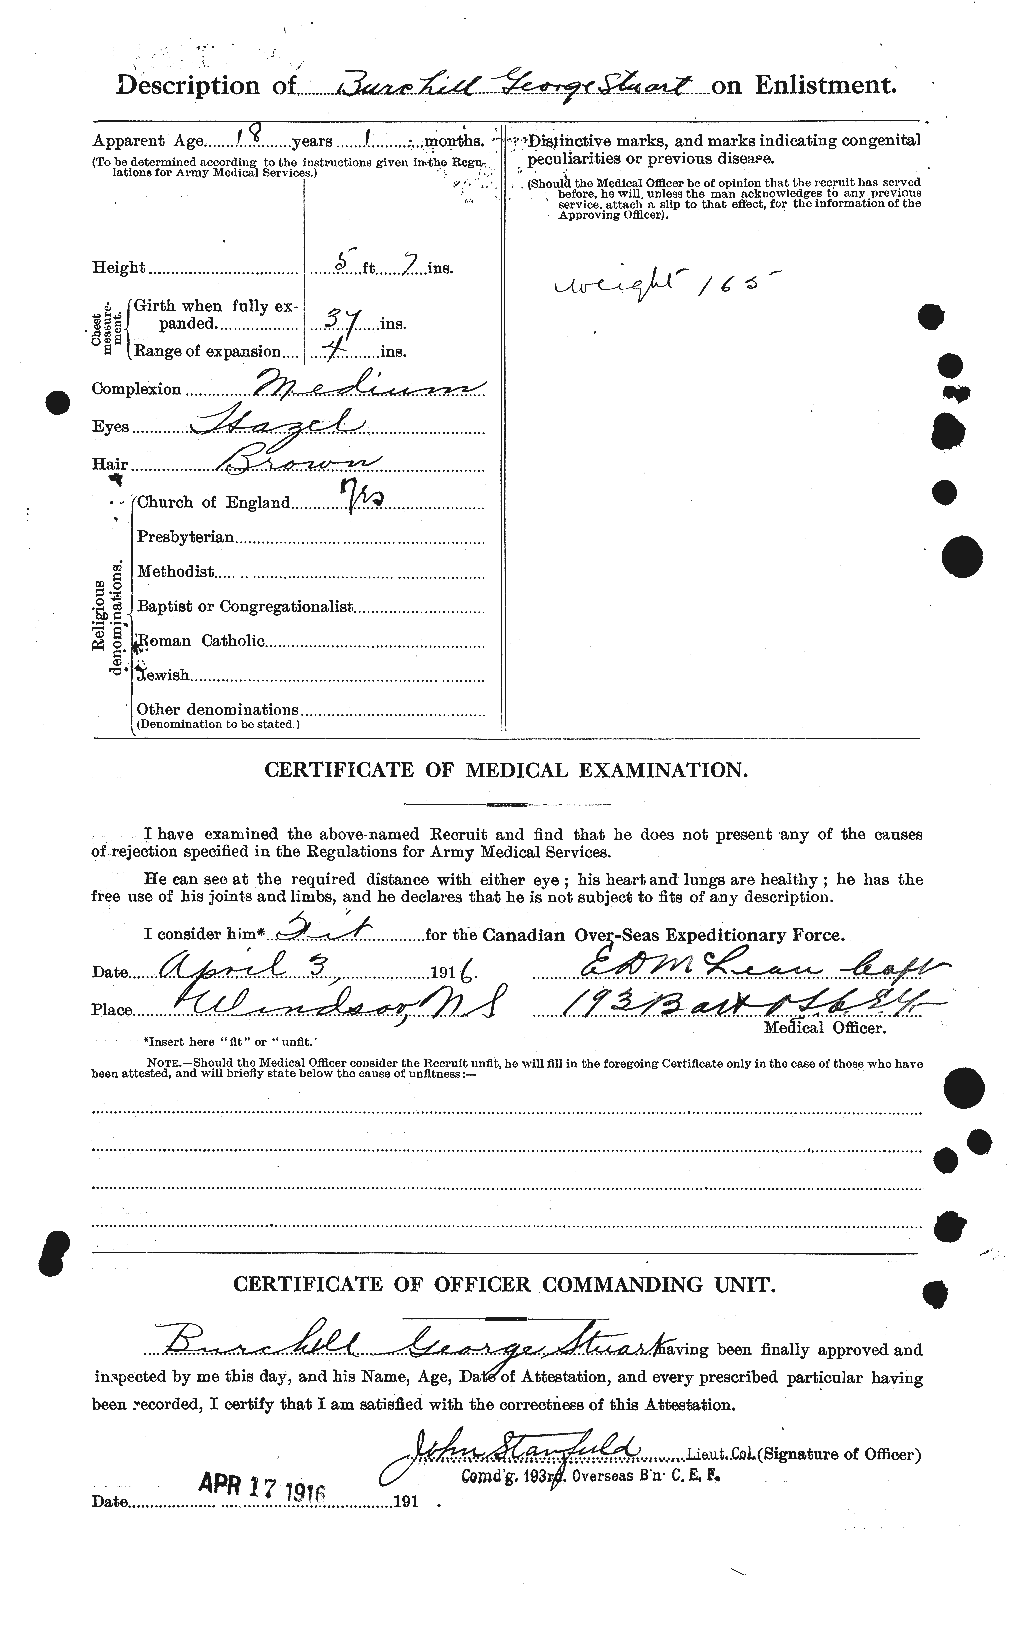 Personnel Records of the First World War - CEF 273179b